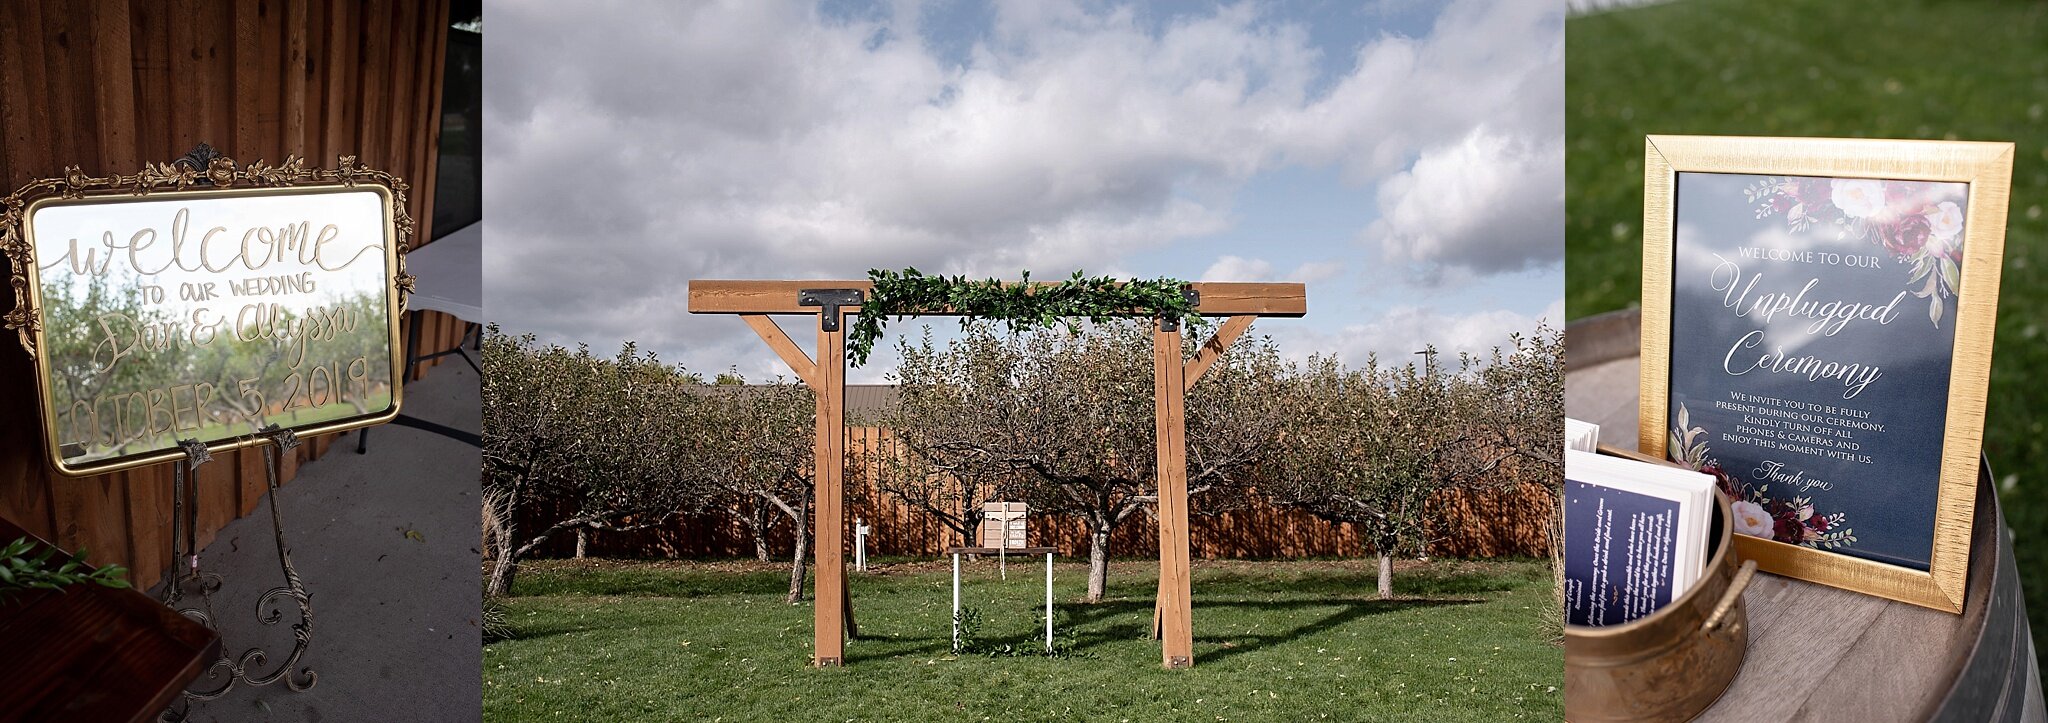 wedding at meadow barn at country orchards south dakota